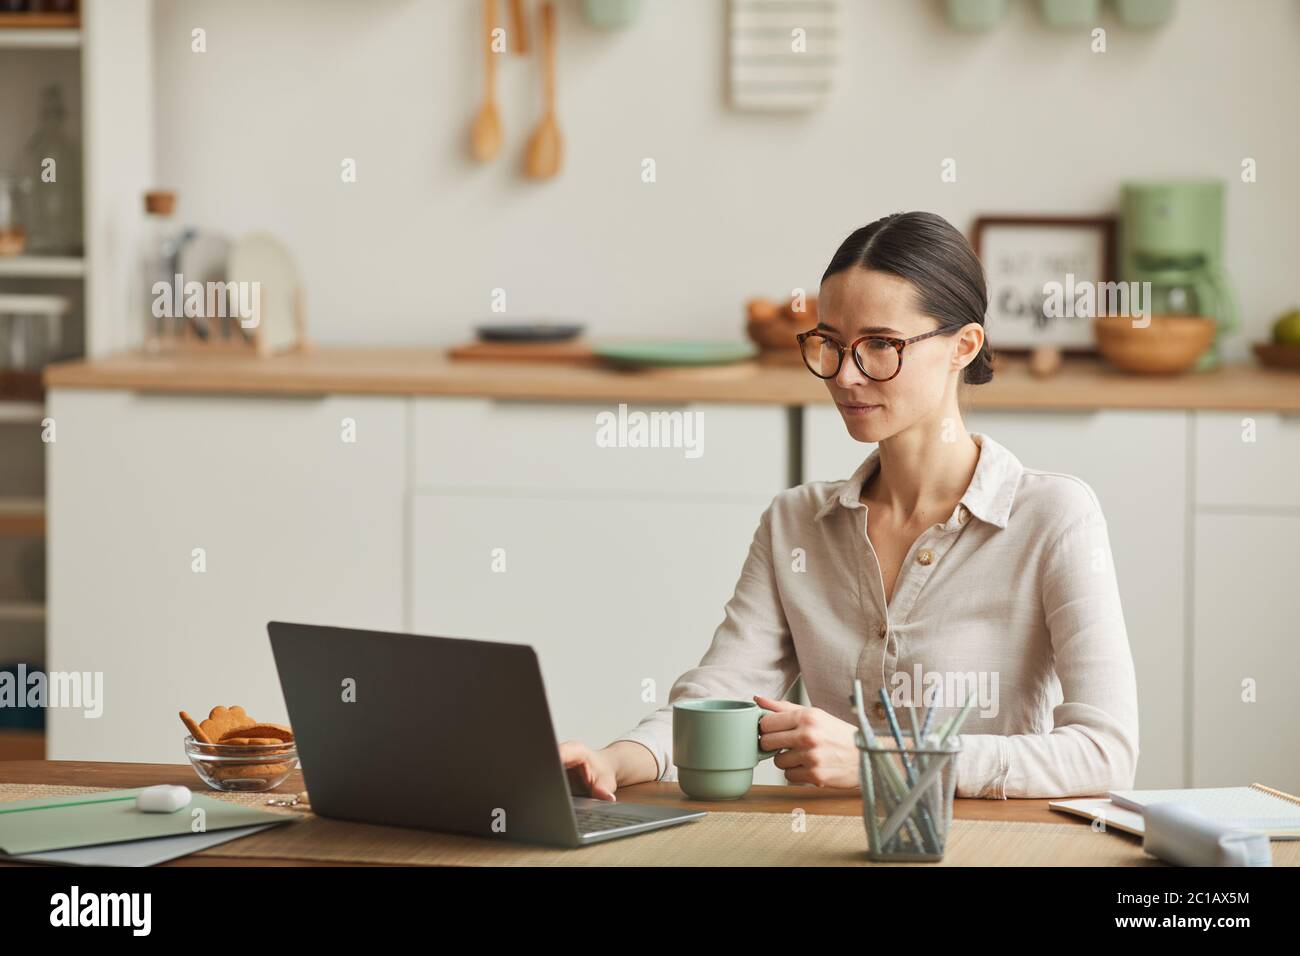 Portrait of elegant young woman drinking coffee while using laptop at cozy home office workplace, copy space Stock Photo